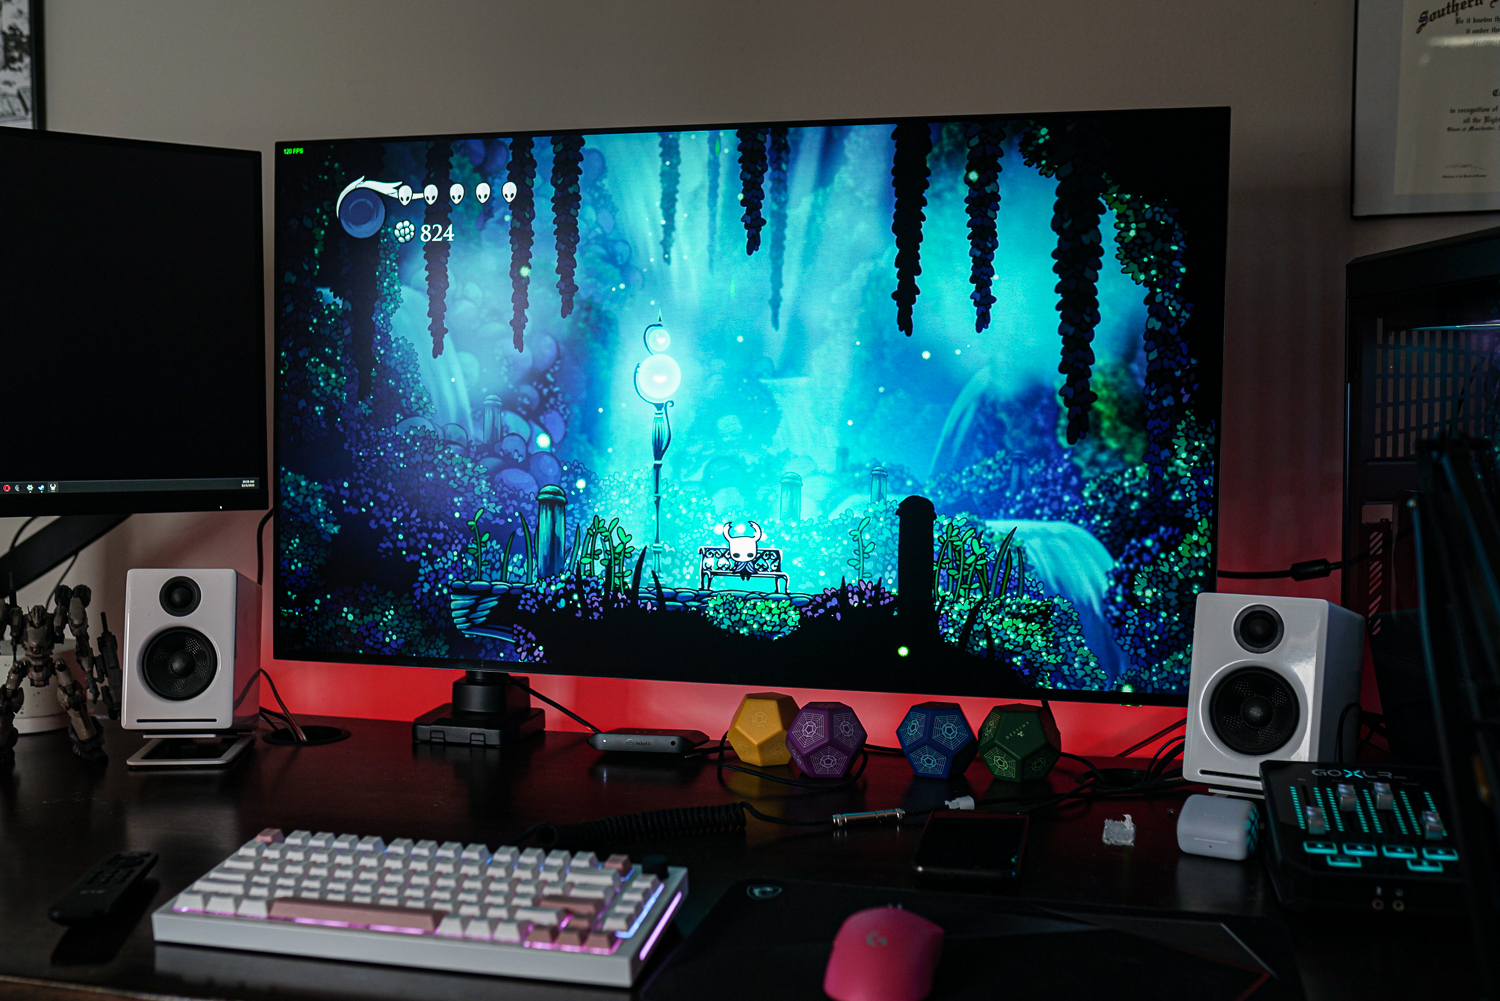 Hollow Knight running on a KTC monitor.